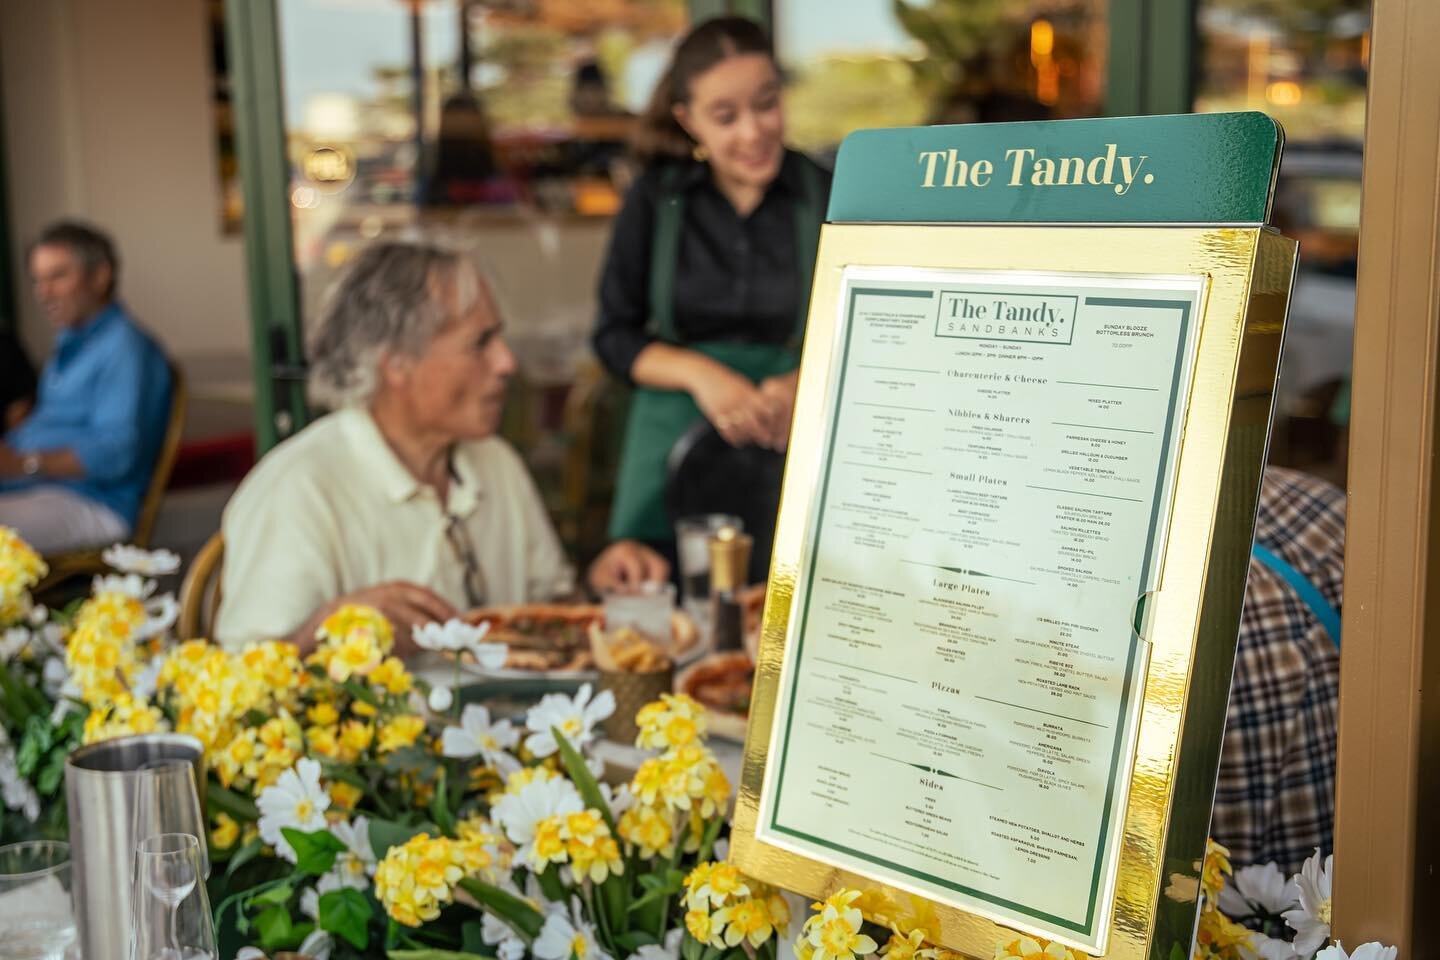 Sunny Afternoons at The Tandy 🥂☀️🍾

Whatever the occasion we&rsquo;ve got you covered, whether it&rsquo;s a business lunch, champagne afternoon or date night, our weekly events have something for everyone 

Here&rsquo;s what we have coming up this 